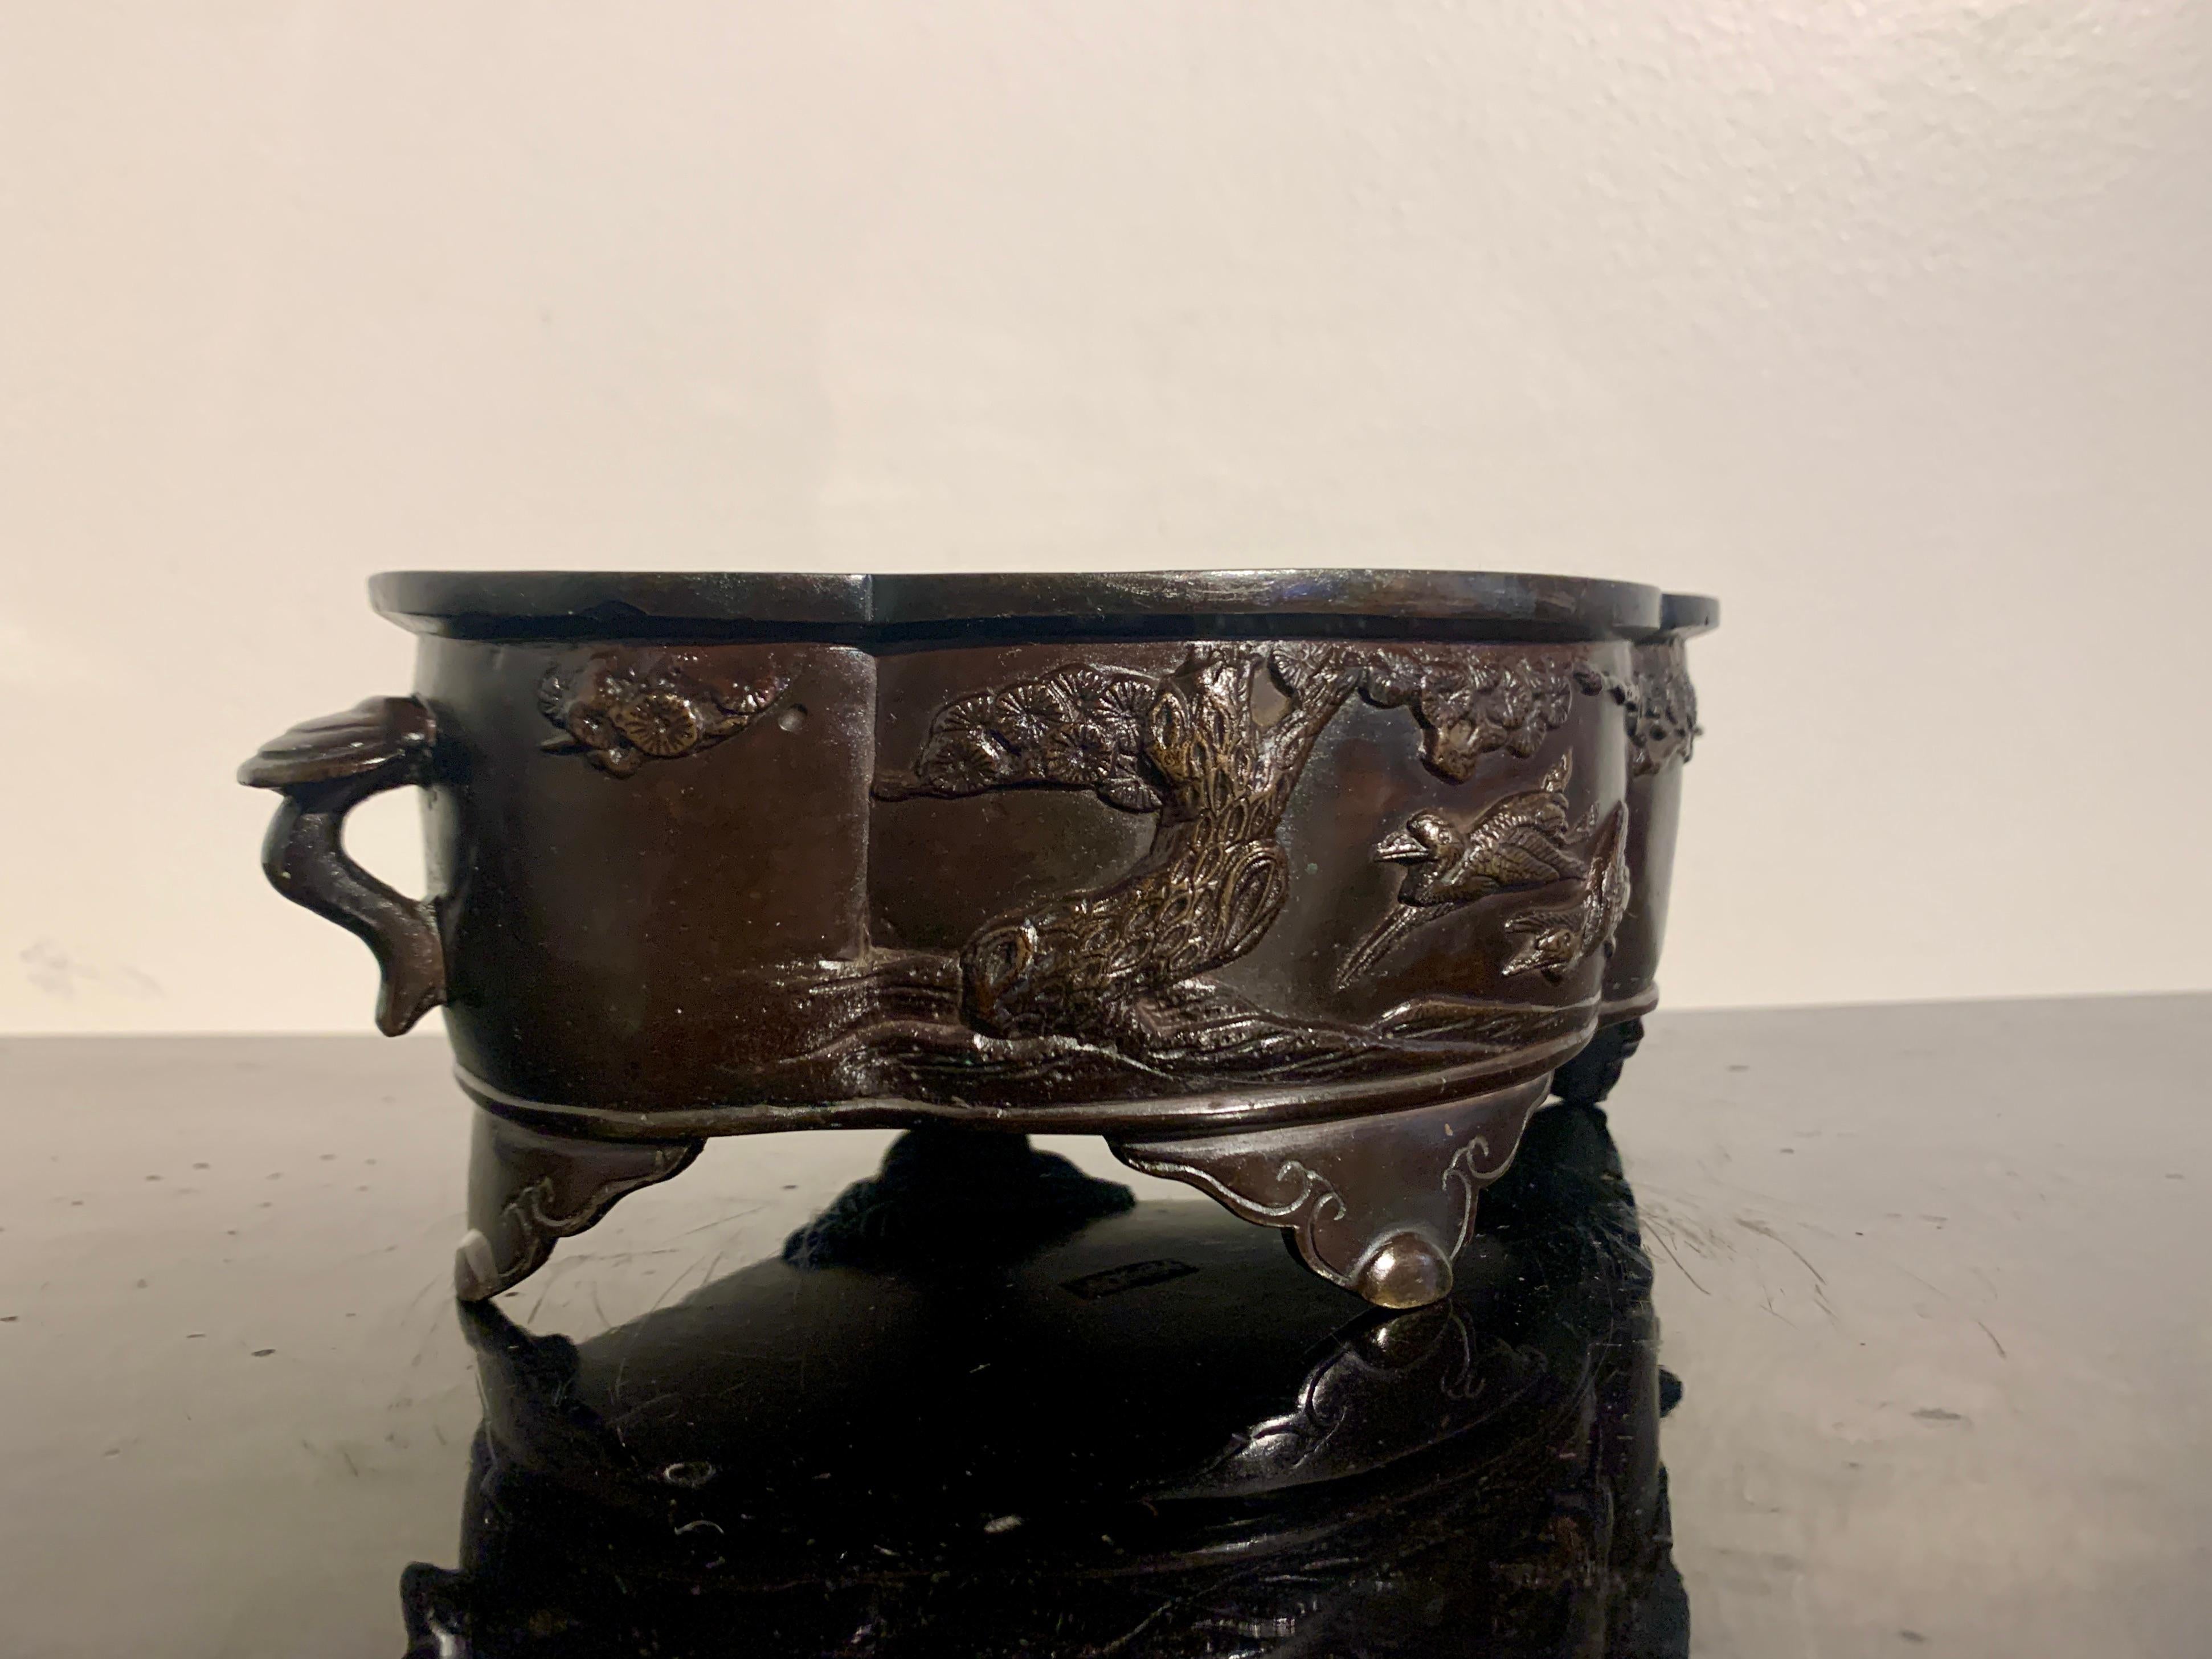 A lovely small Japanese cast bronze suiban, shallow vessel for ikebana flower arranging, signed Takashima, Meiji Period, circa 1900, Japan.

The small Japanese bronze suiban of lobed, quatrefoil form, with two handles, and set on four shaped feet.